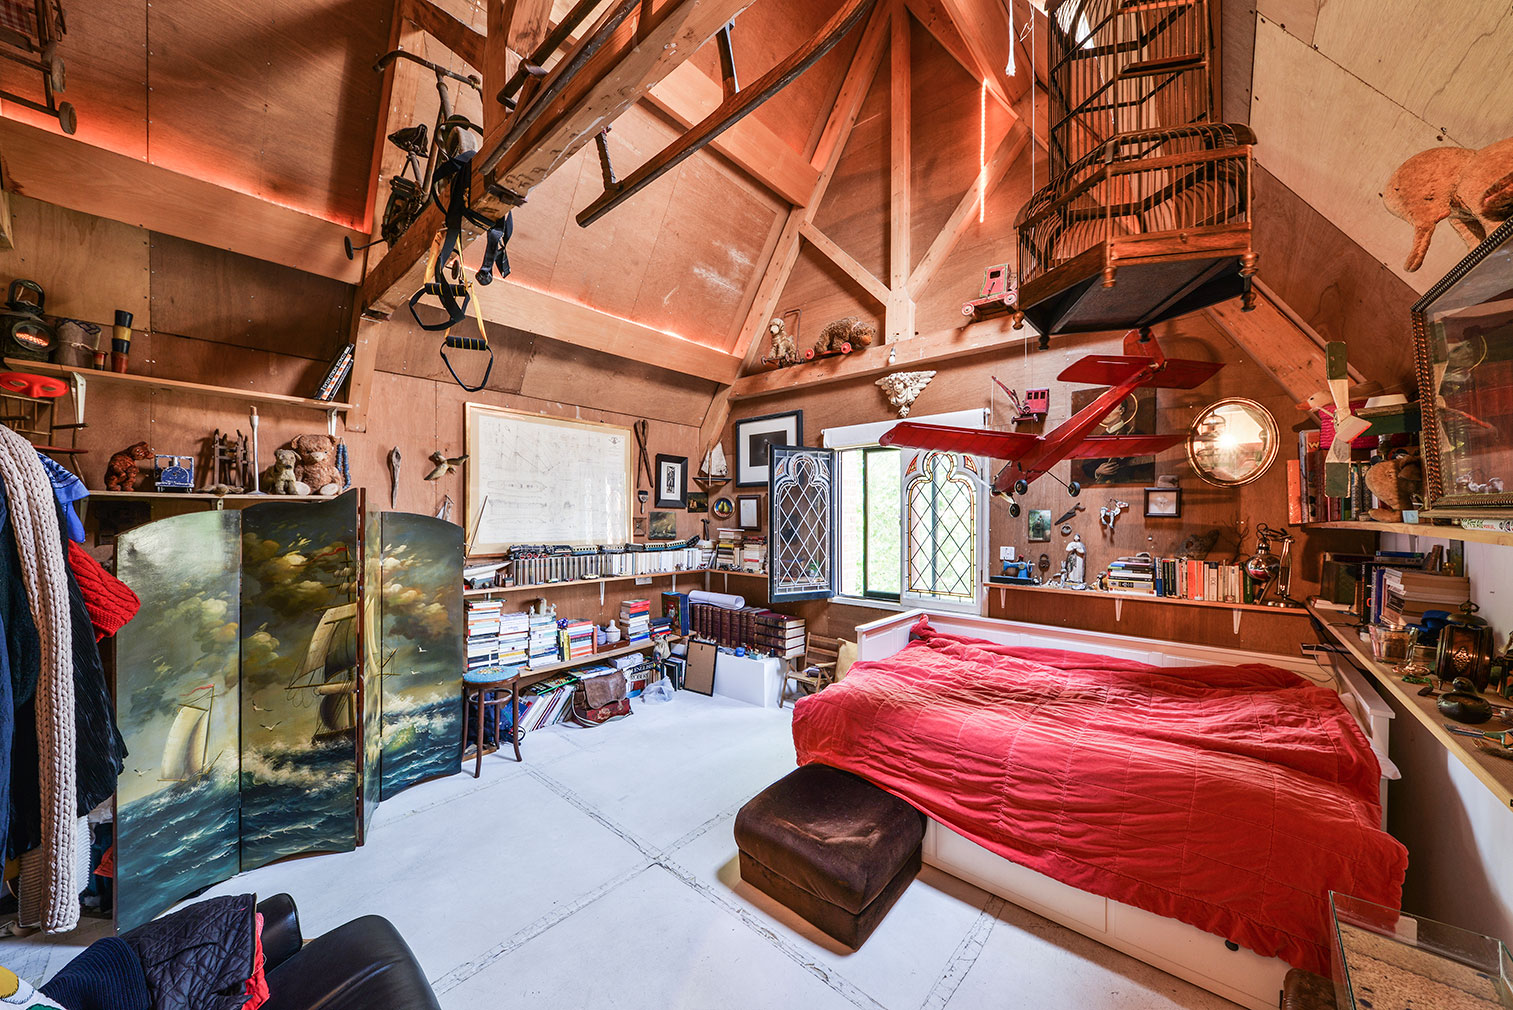 The London home and studio of the late visual artist Nancy Fouts is on sale for £3,999,950 – and it is packed full of Victorian neo-gothic details.